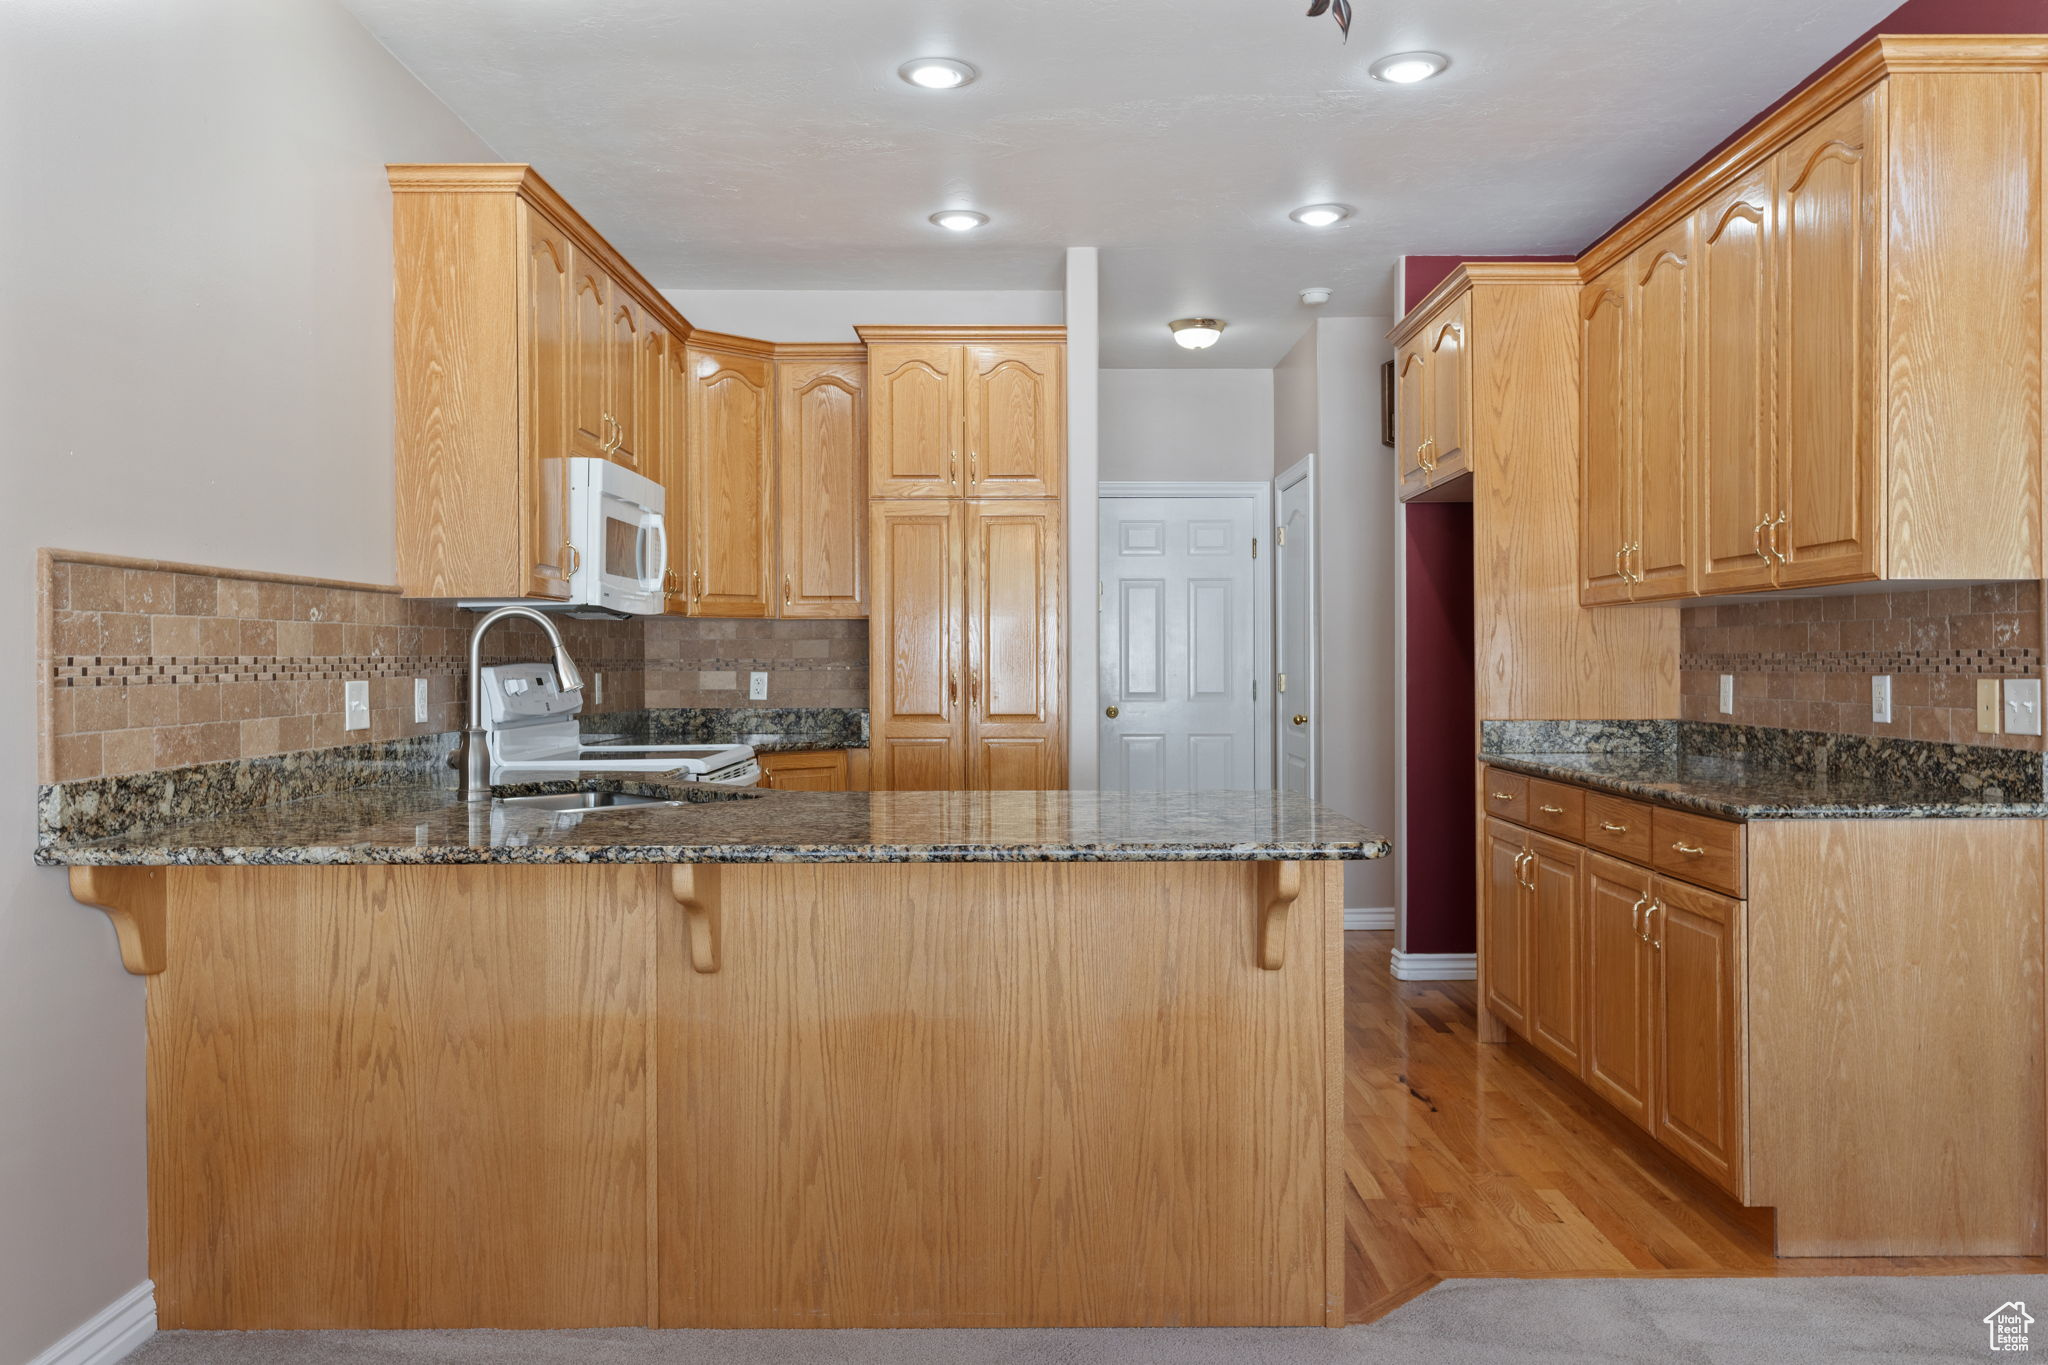 Kitchen featuring white appliances, backsplash, light wood-type flooring, and granite counters